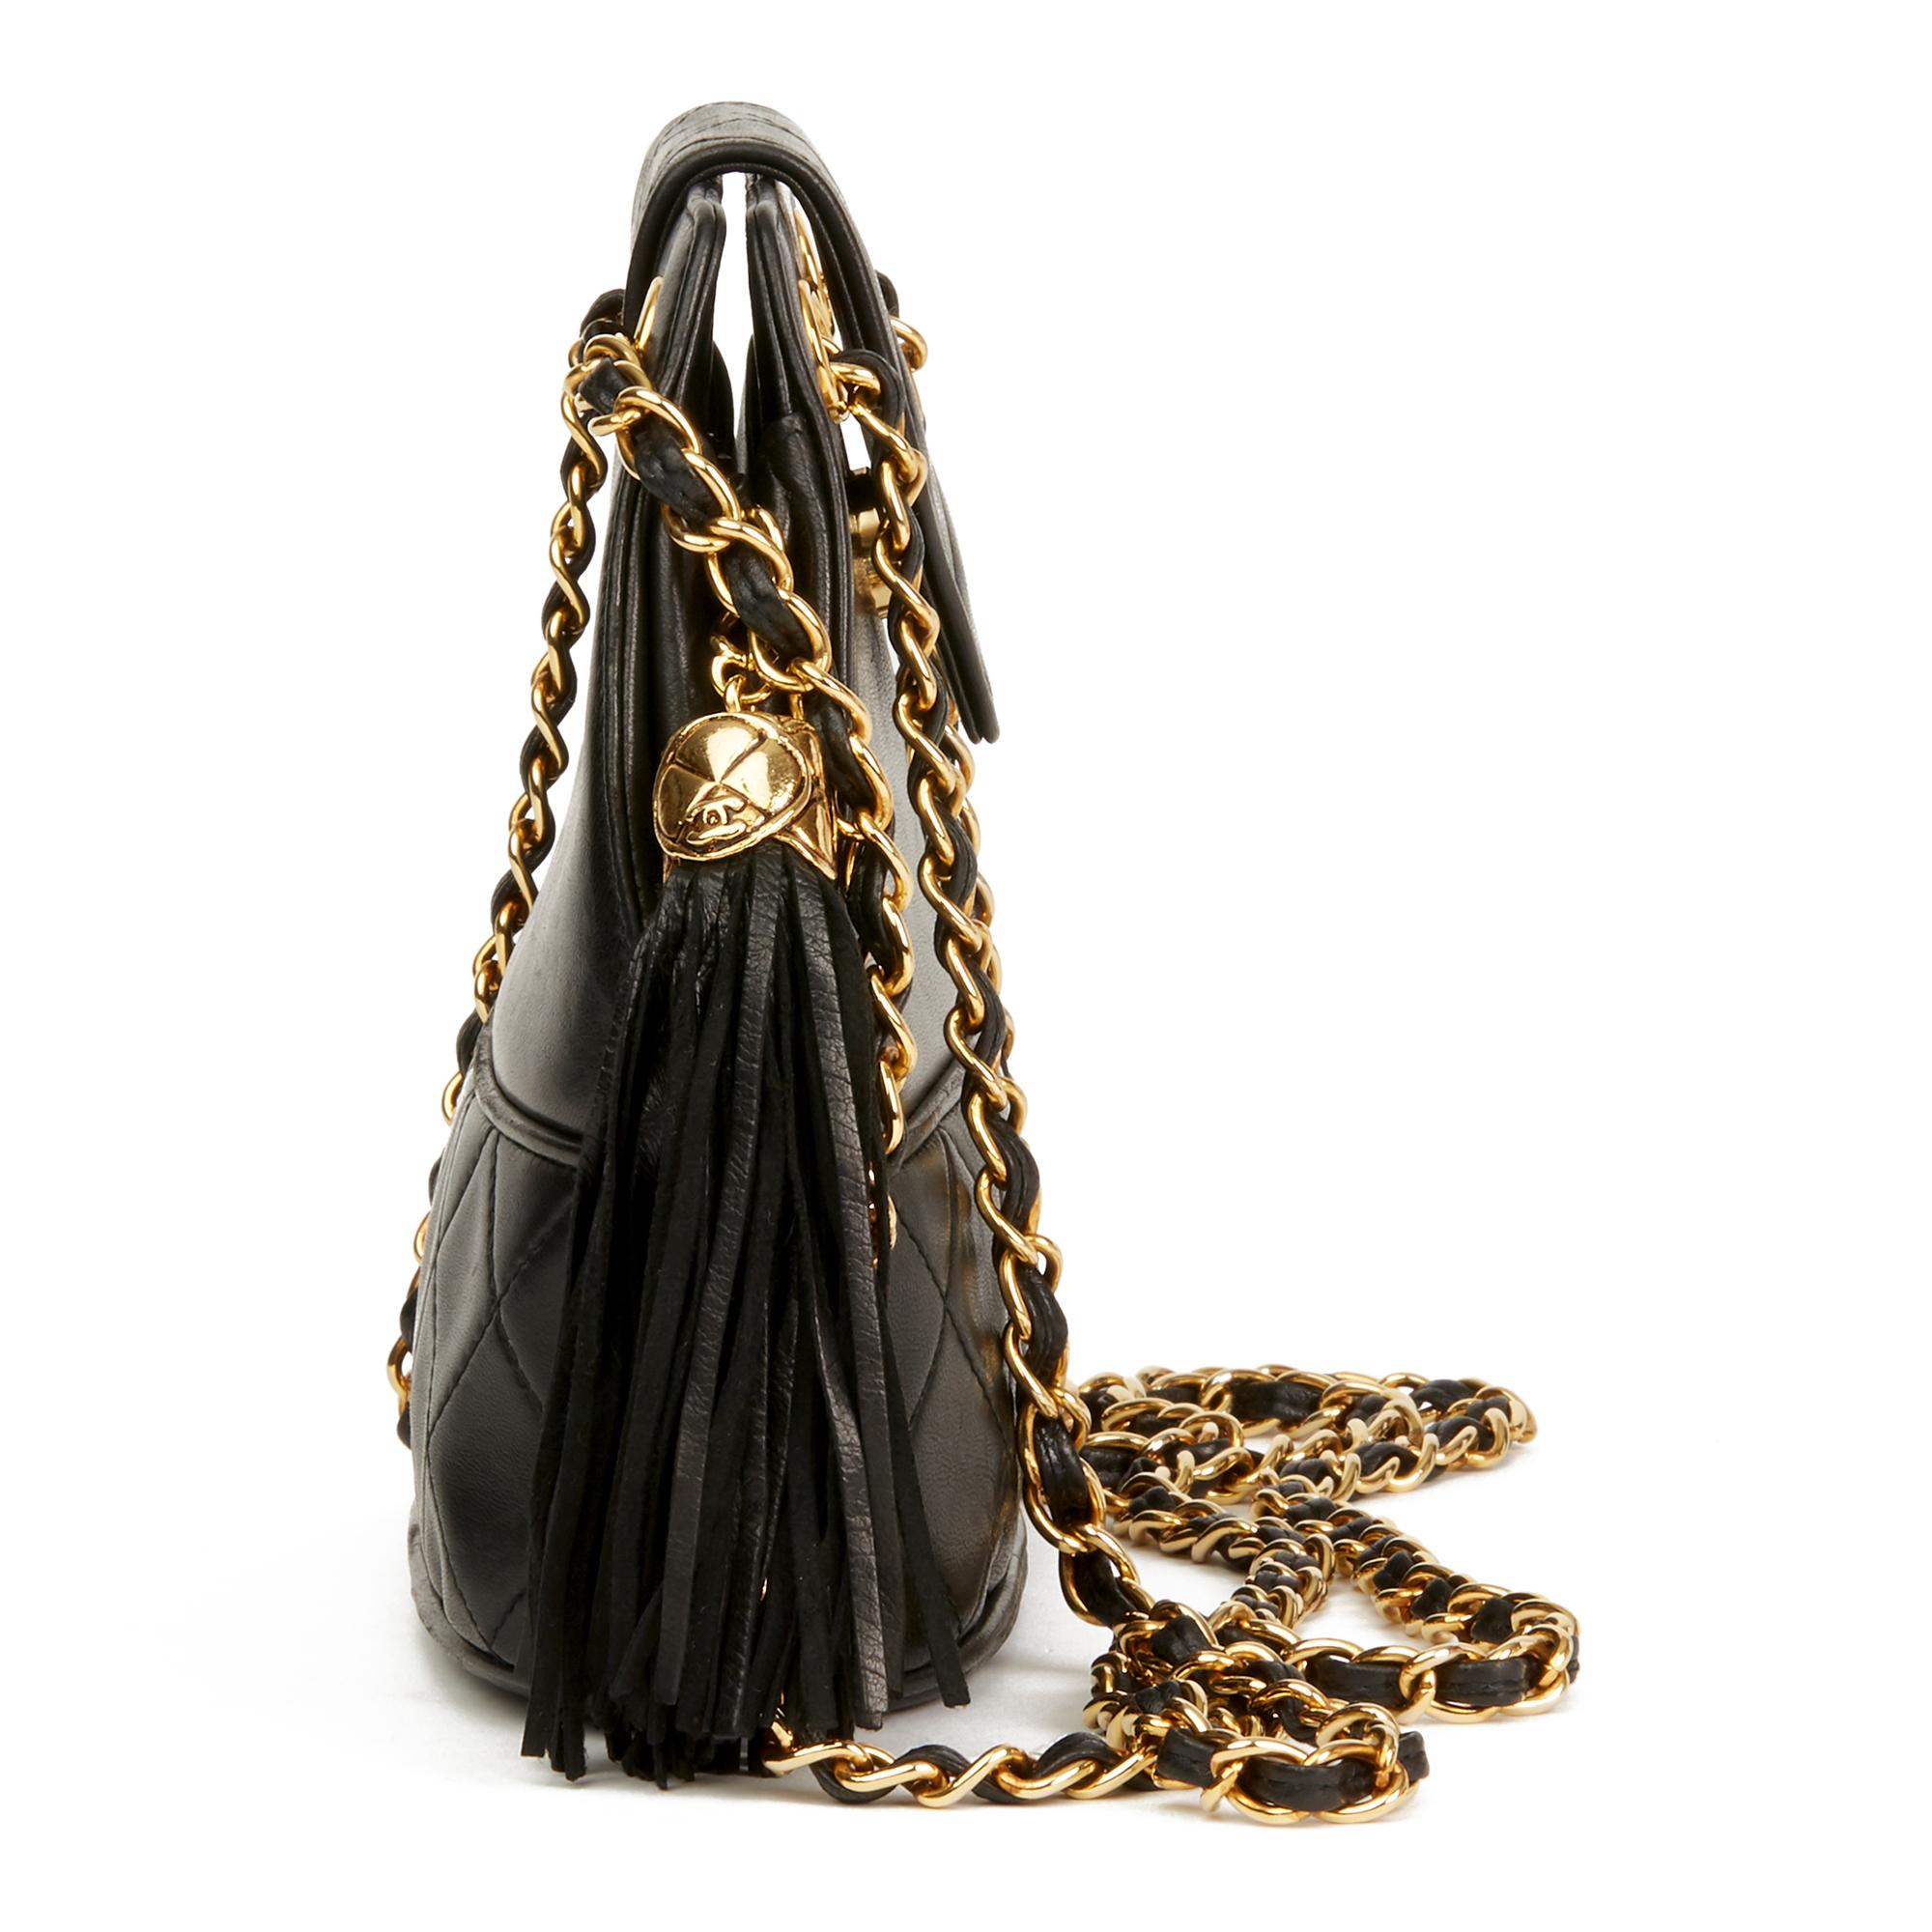 CHANEL
Black Quilted Lambskin Vintage Timeless Fringe Bucket Bag

Reference: HB2859
Serial Number: 1301919
Age (Circa): 1989
Authenticity Details: Serial Sticker (Made in Italy)
Gender: Ladies
Type: Shoulder

Colour: Black
Hardware: